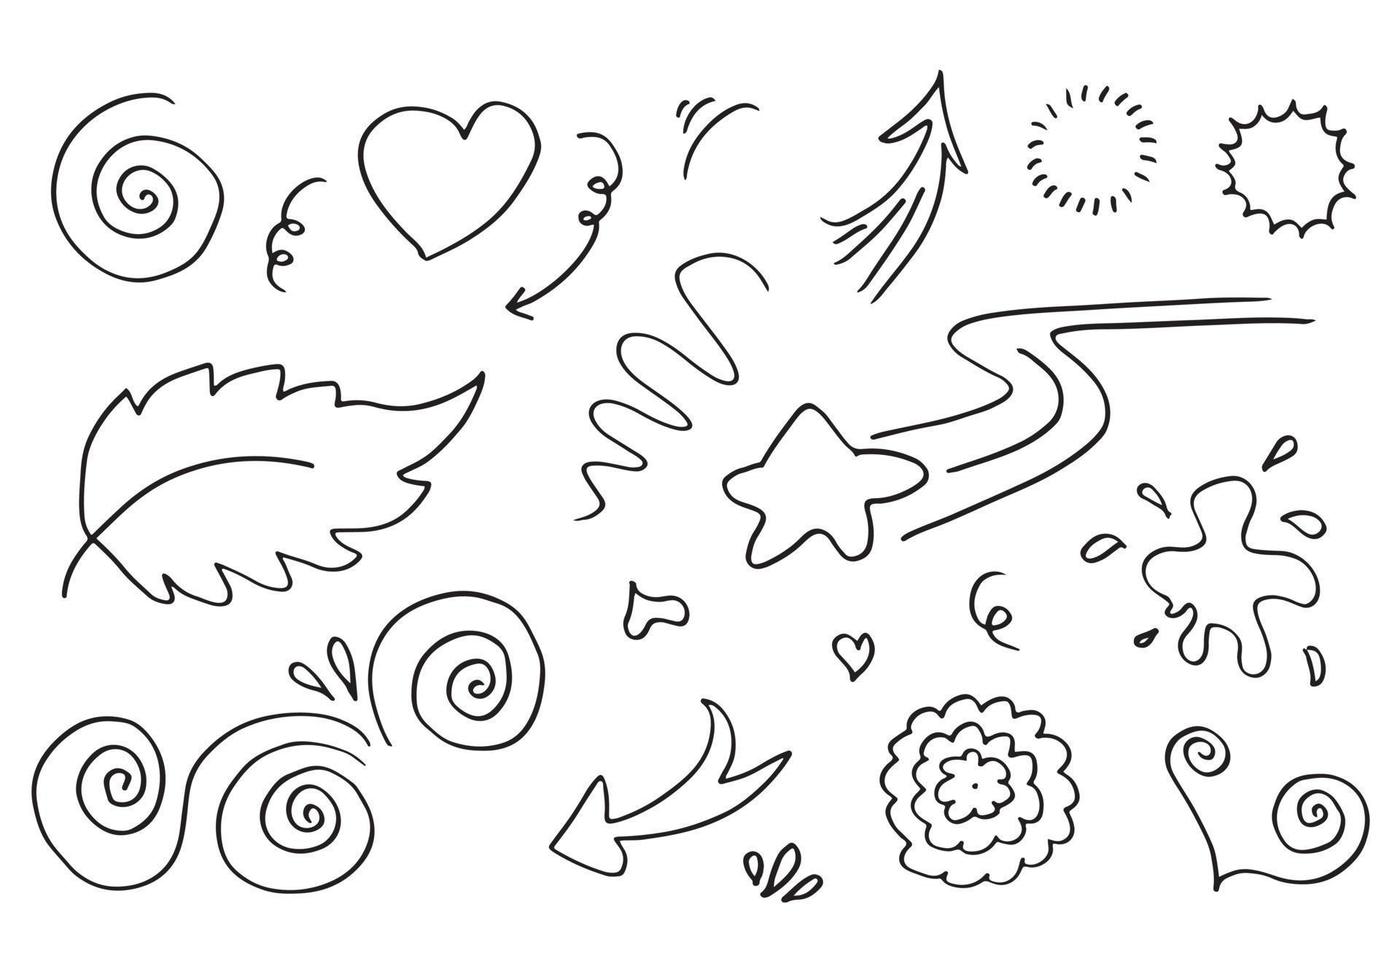 Hand drawn set elements, black on white background. Arrow, heart, love, star, leaf, sun, light, flower,Swishes, swoops, emphasis ,swirl, for concept design. vector